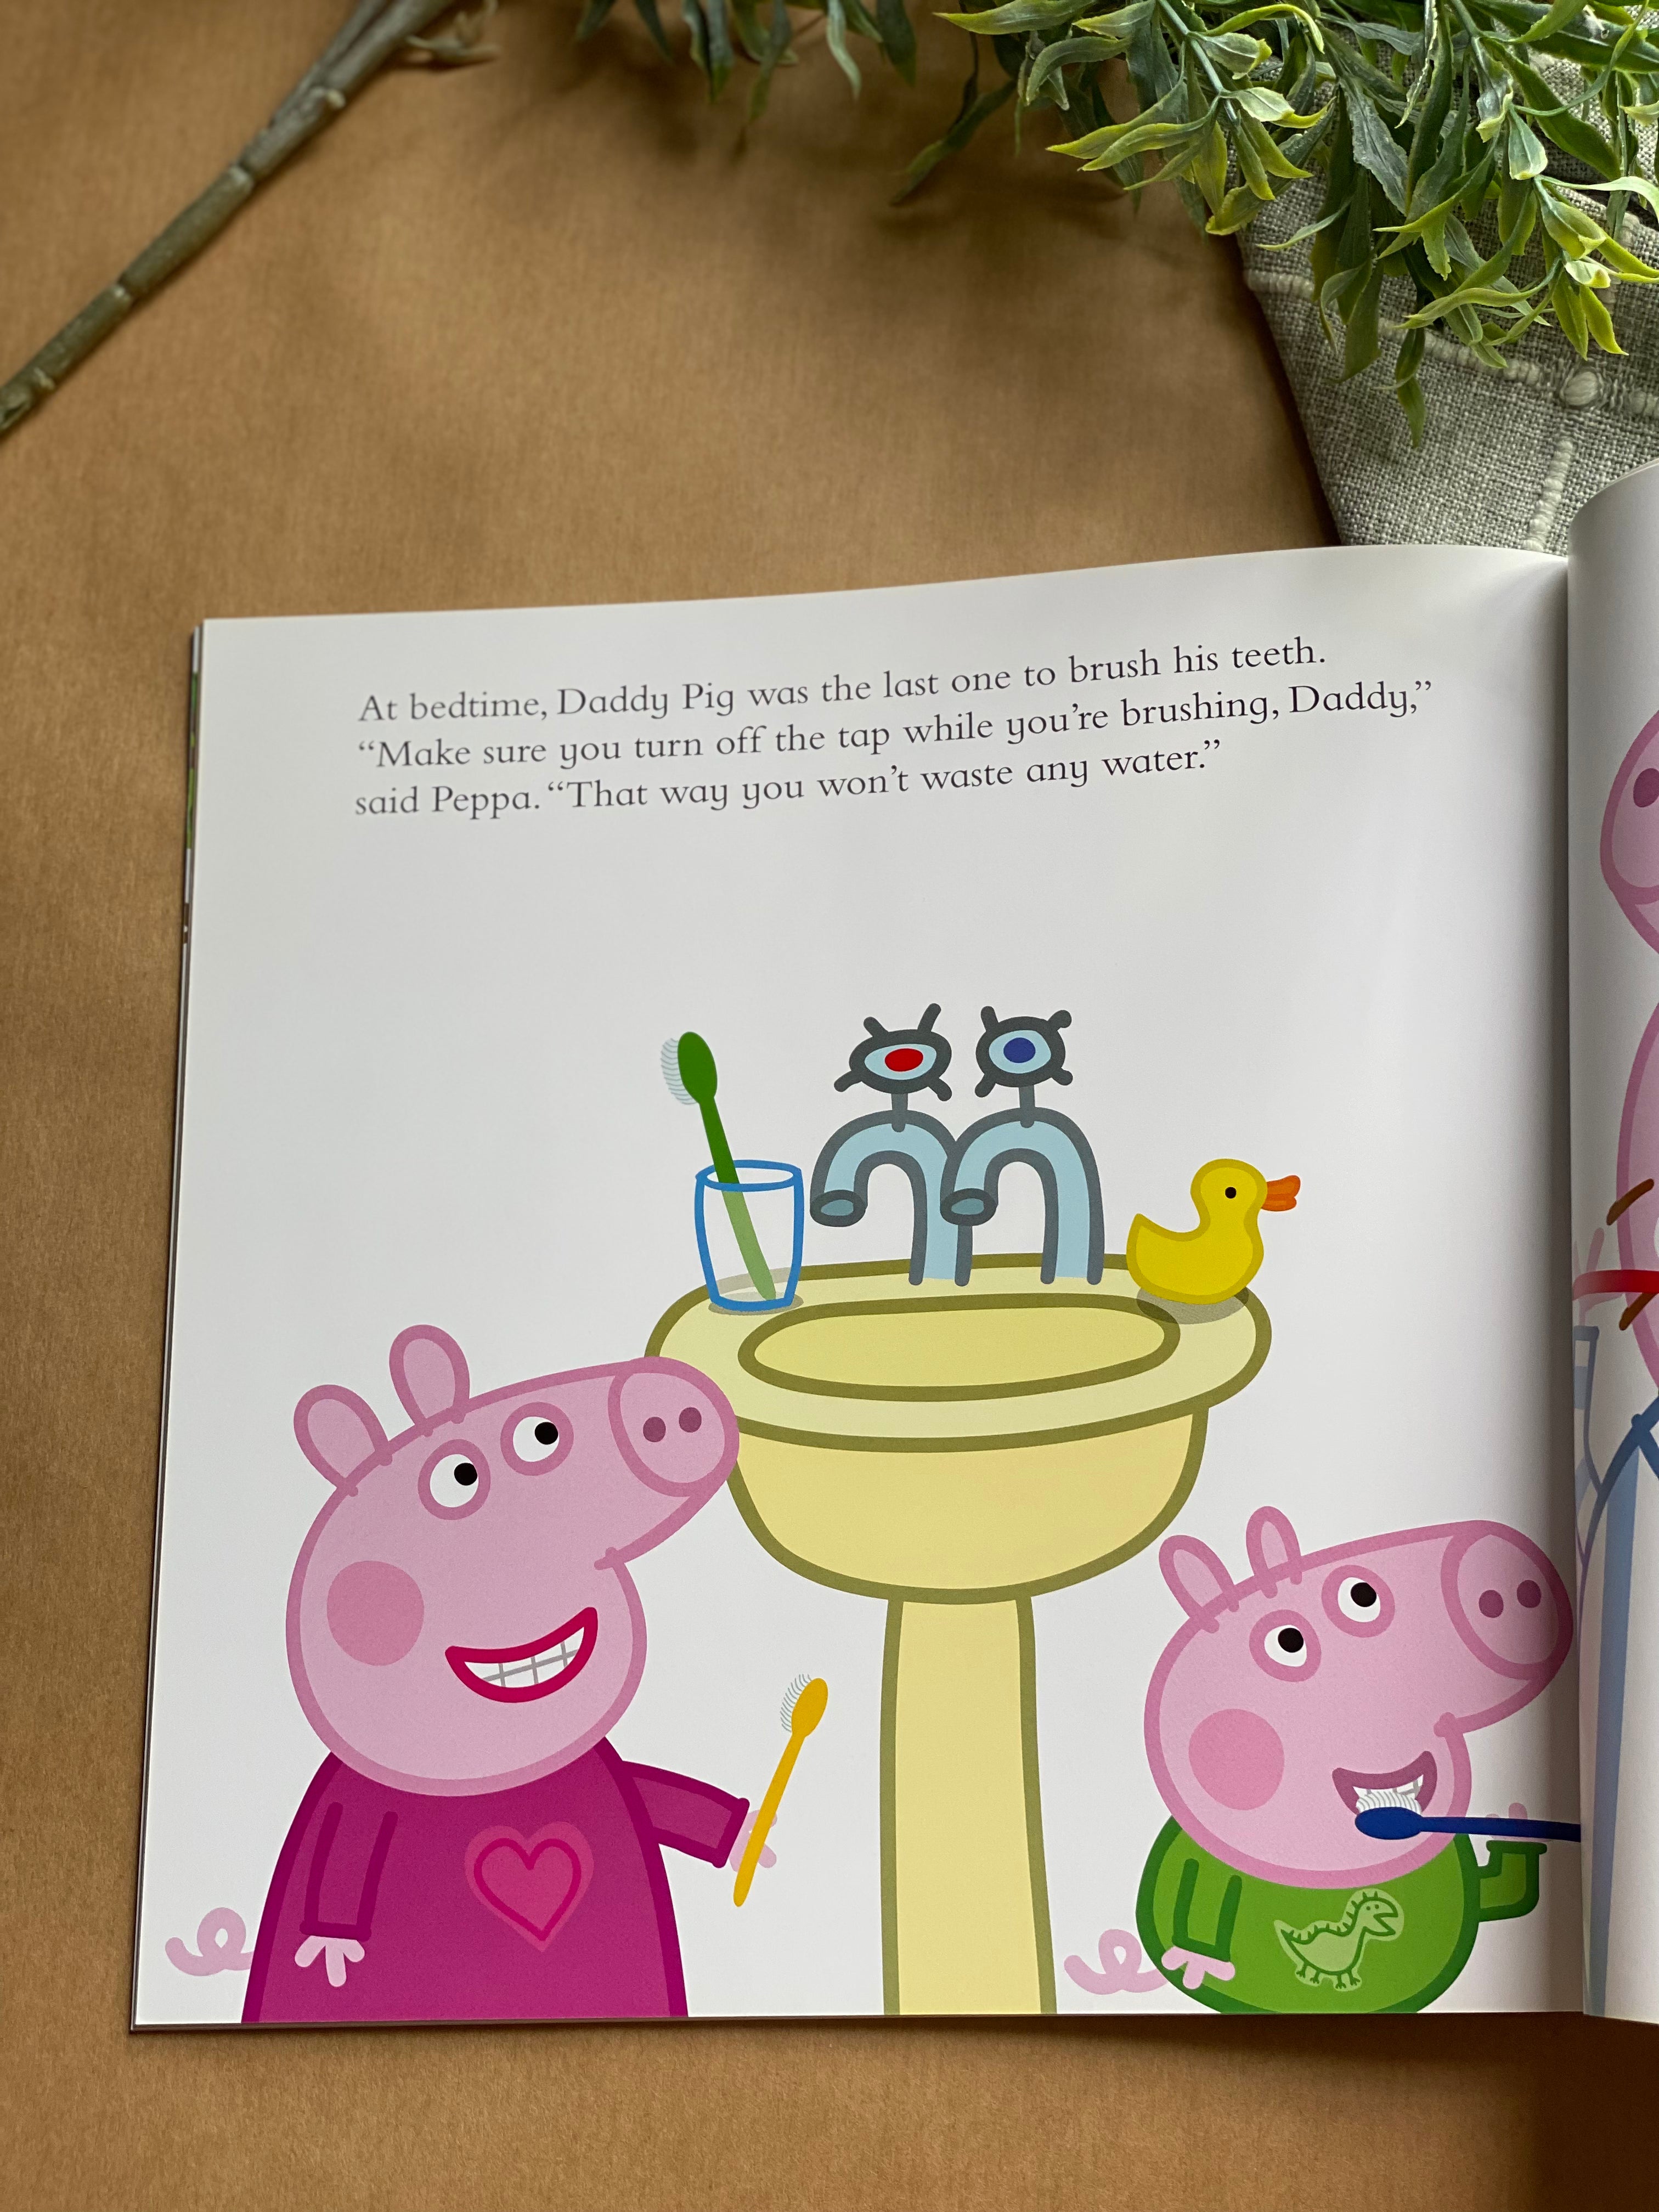 Peppa Pig: Peppa Loves Our Planet